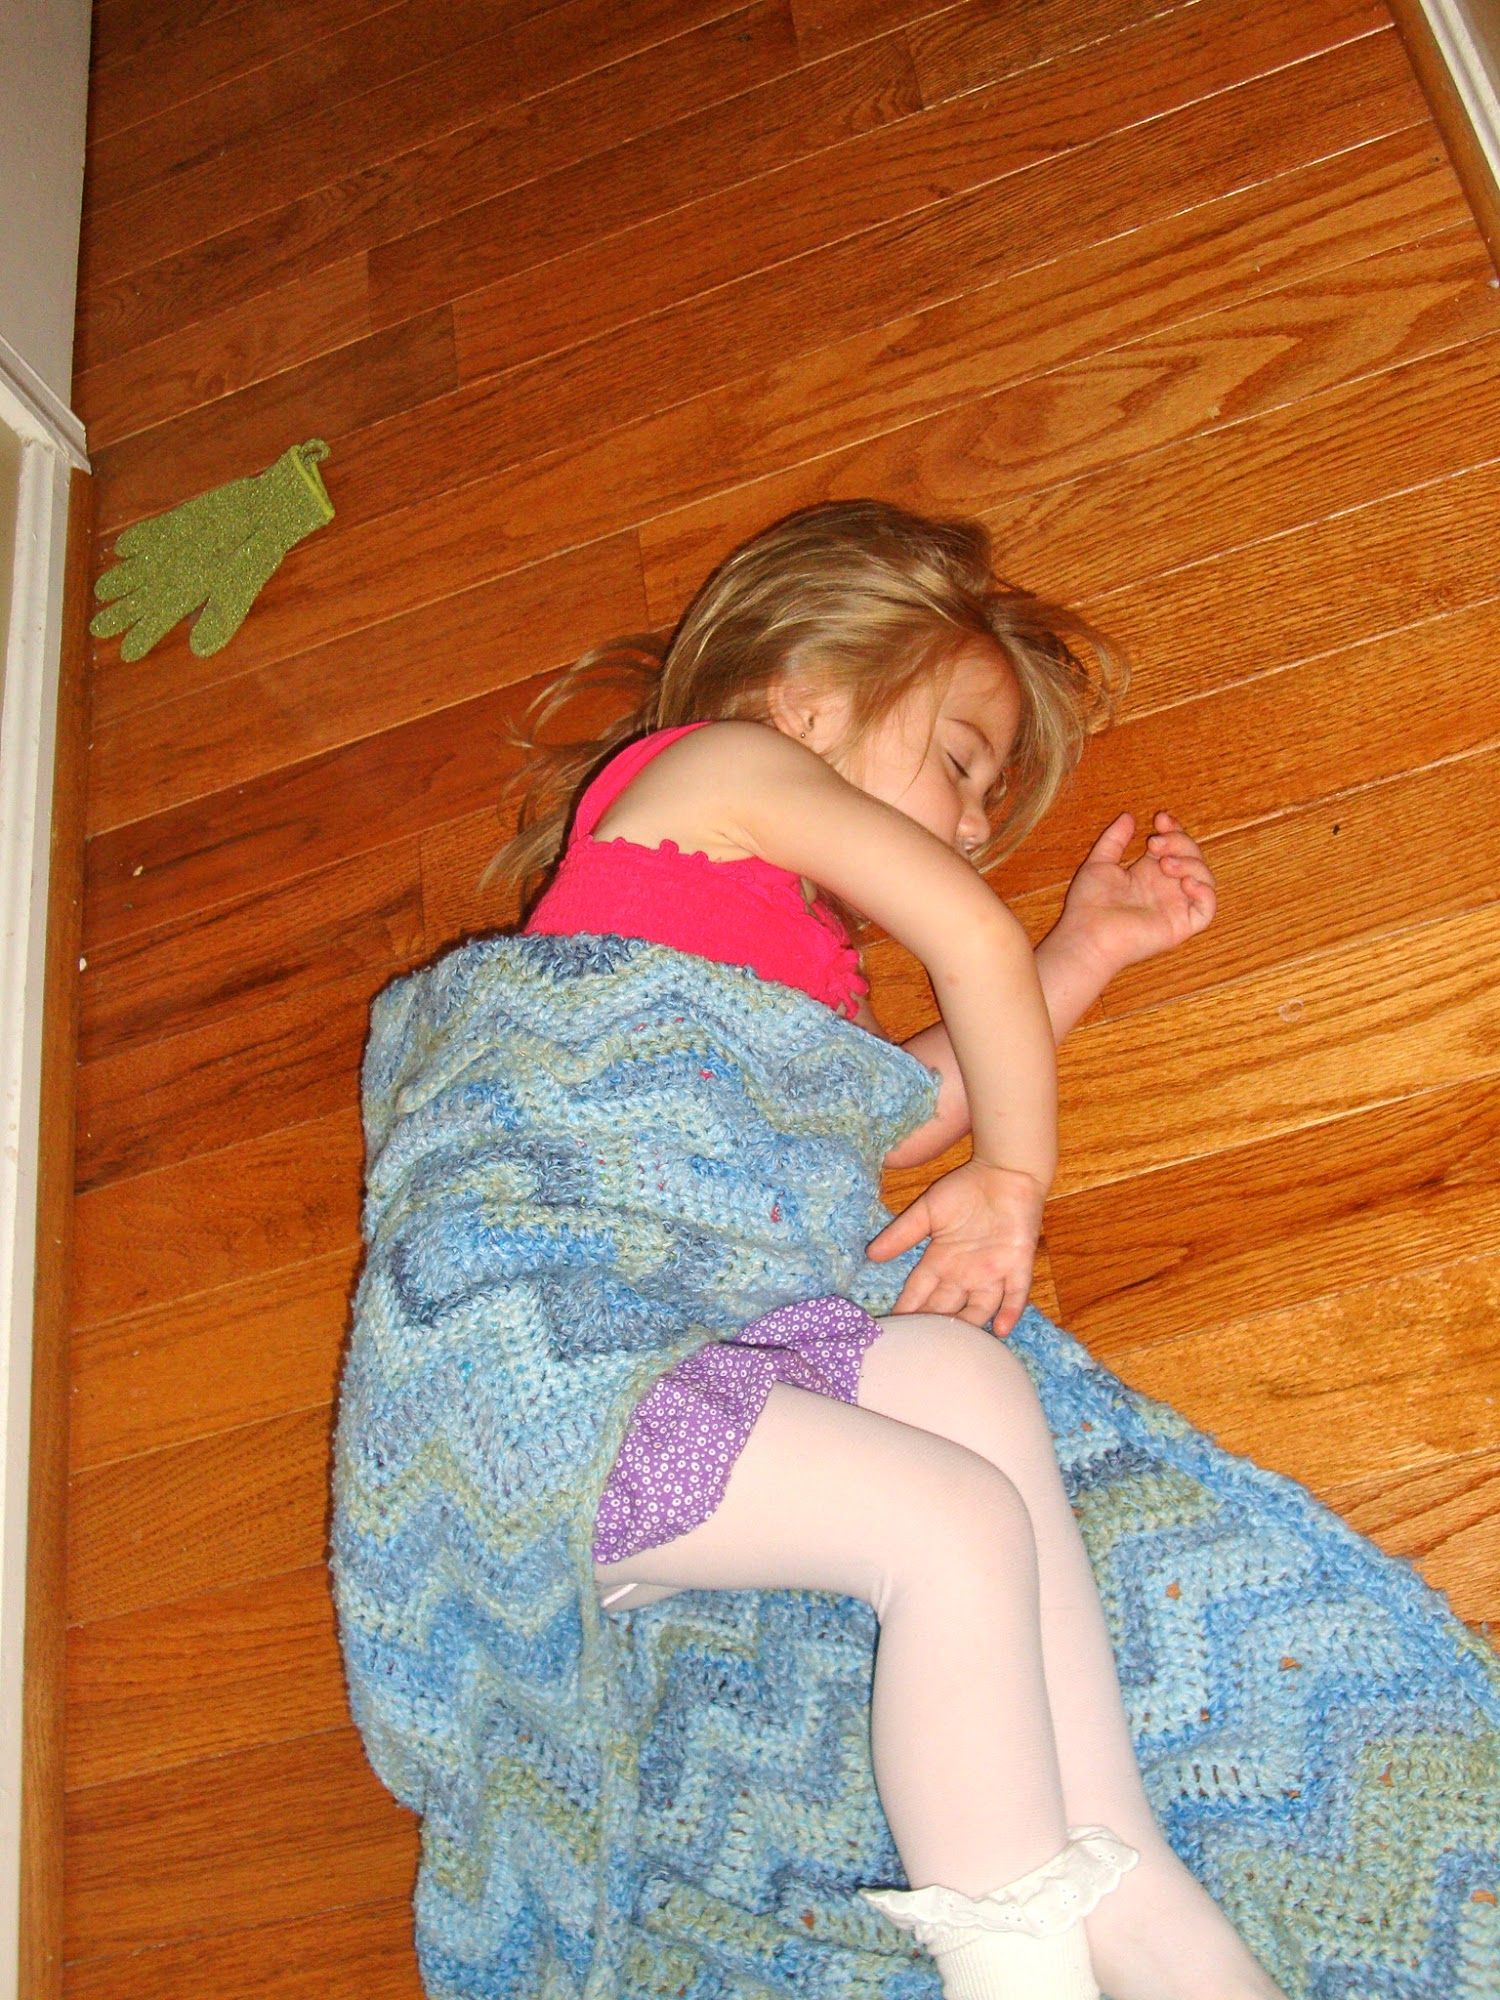  Same day as above picture. I had taken her to her room only to find her later asleep on the hard wood floor in our front hall. She took the time to put on tights and frilly socks before falling asleep again. 